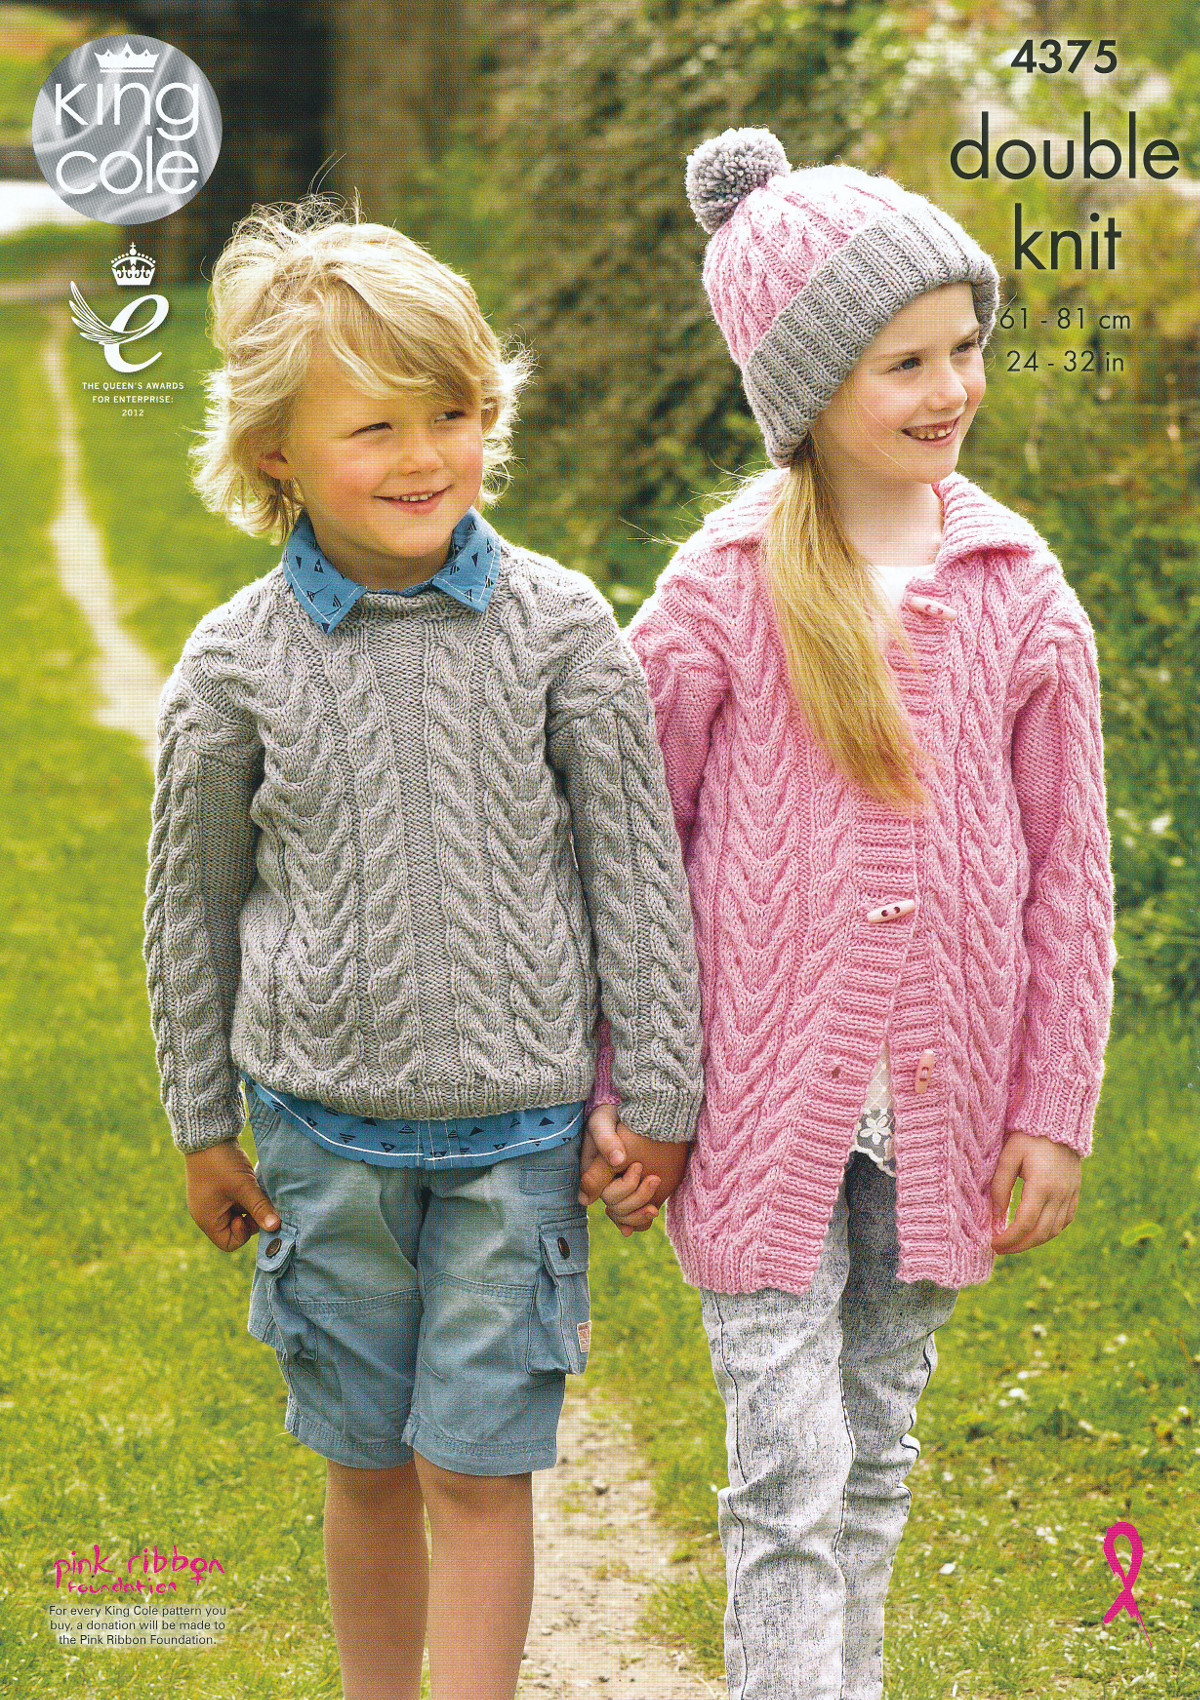 Knit Sweaters Patterns Details About Girls Boys Cable Knit Sweater Cardigan Double Knitting Dk Pattern King Cole 4375